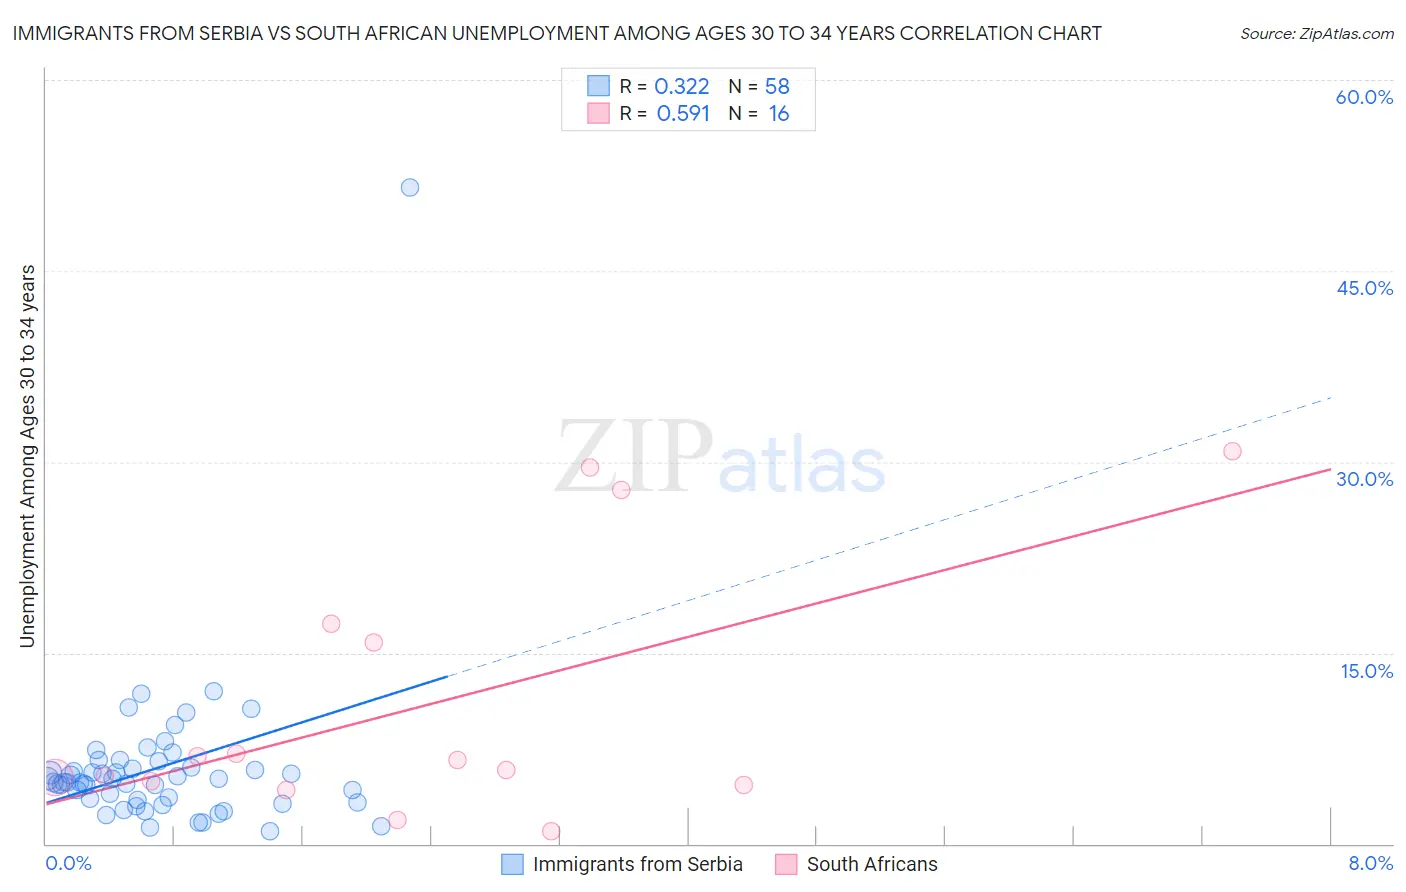 Immigrants from Serbia vs South African Unemployment Among Ages 30 to 34 years